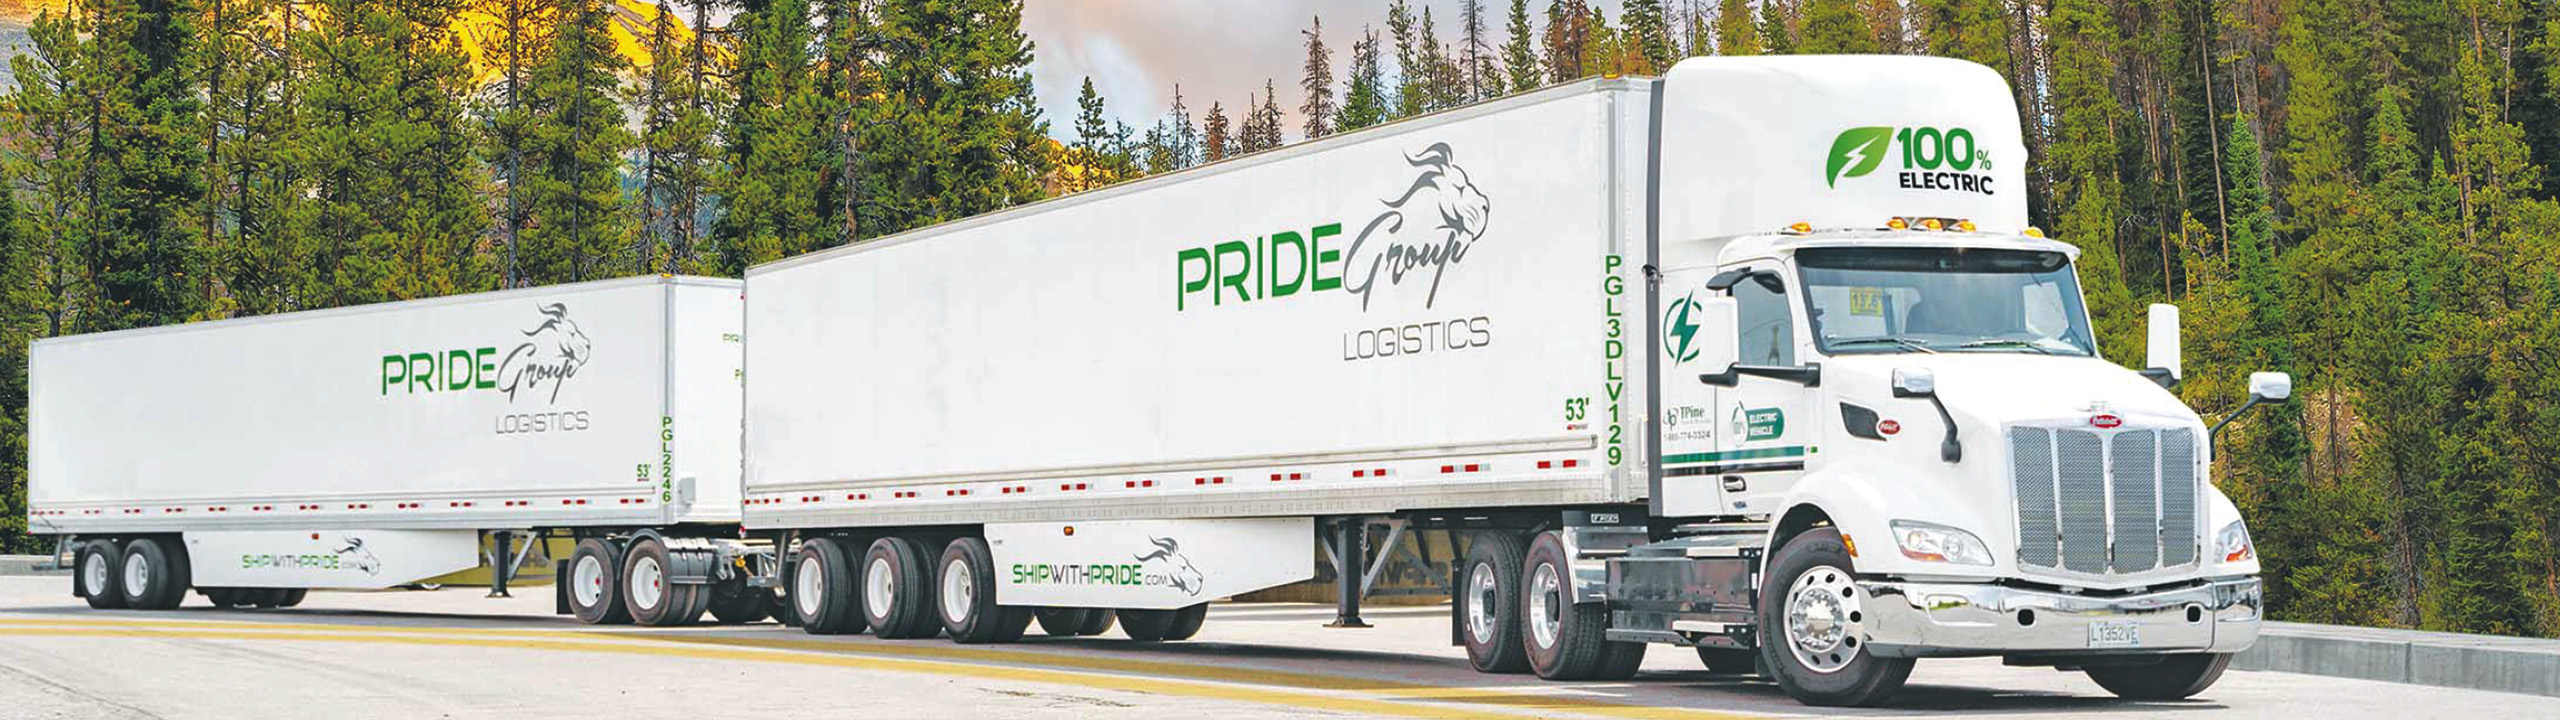 Green Initiatives - green and natural trucking